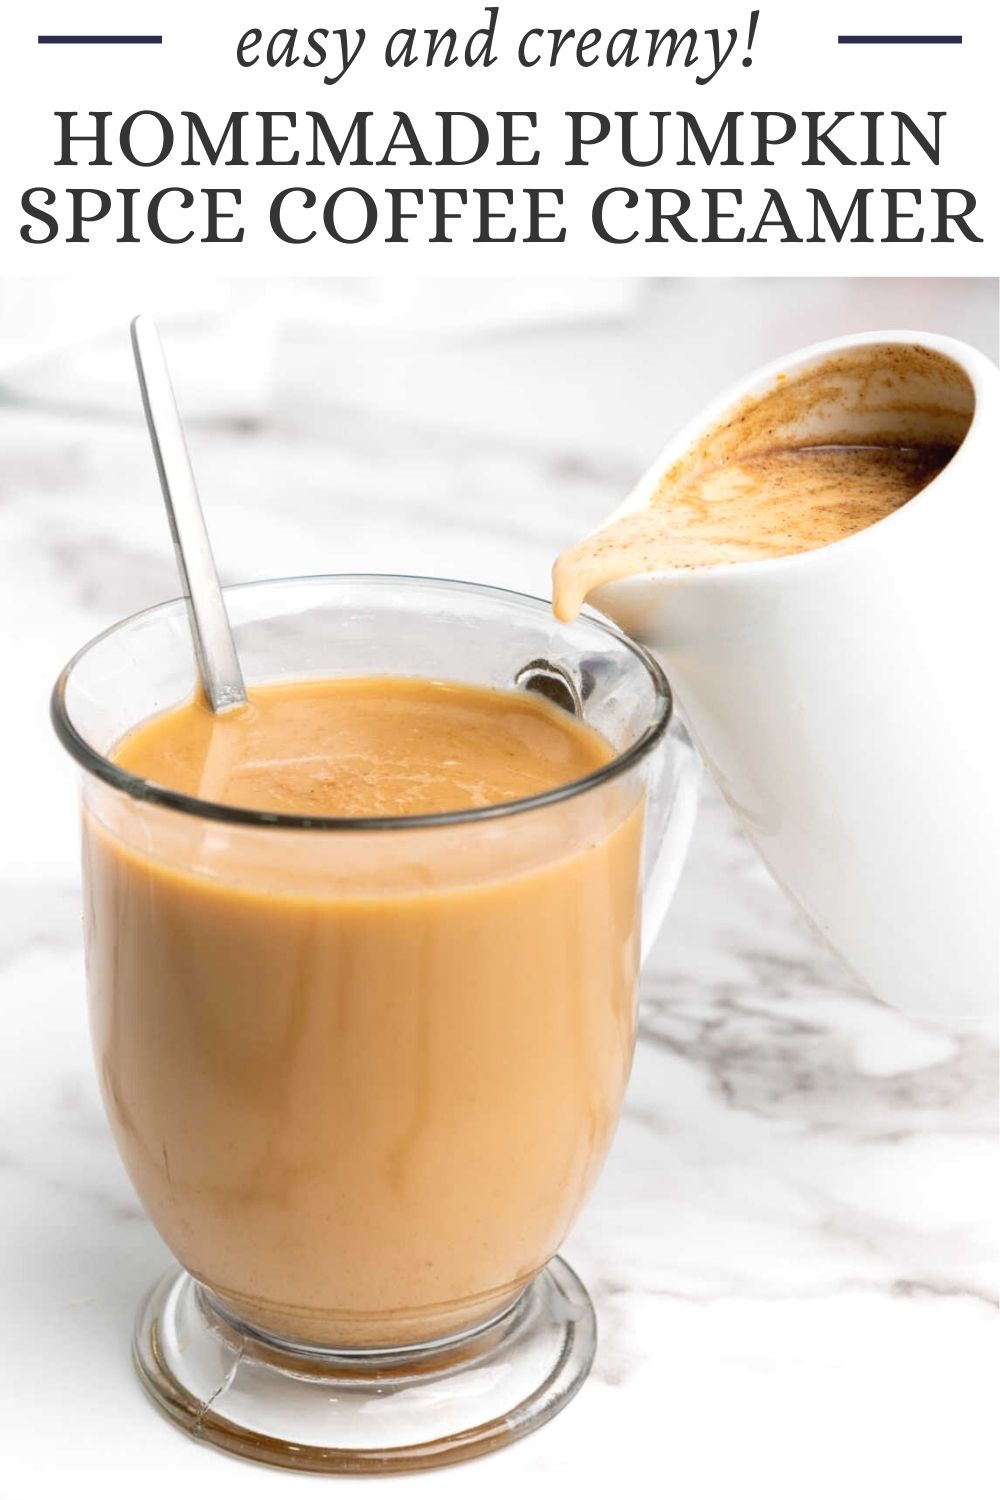 If you like those fancy coffeehouse drinks, you will love knowing you can make something similar at home. Whip up a batch of homemade pumpkin spice coffee creamer and you will be making your own drinks for a fraction of the cost.